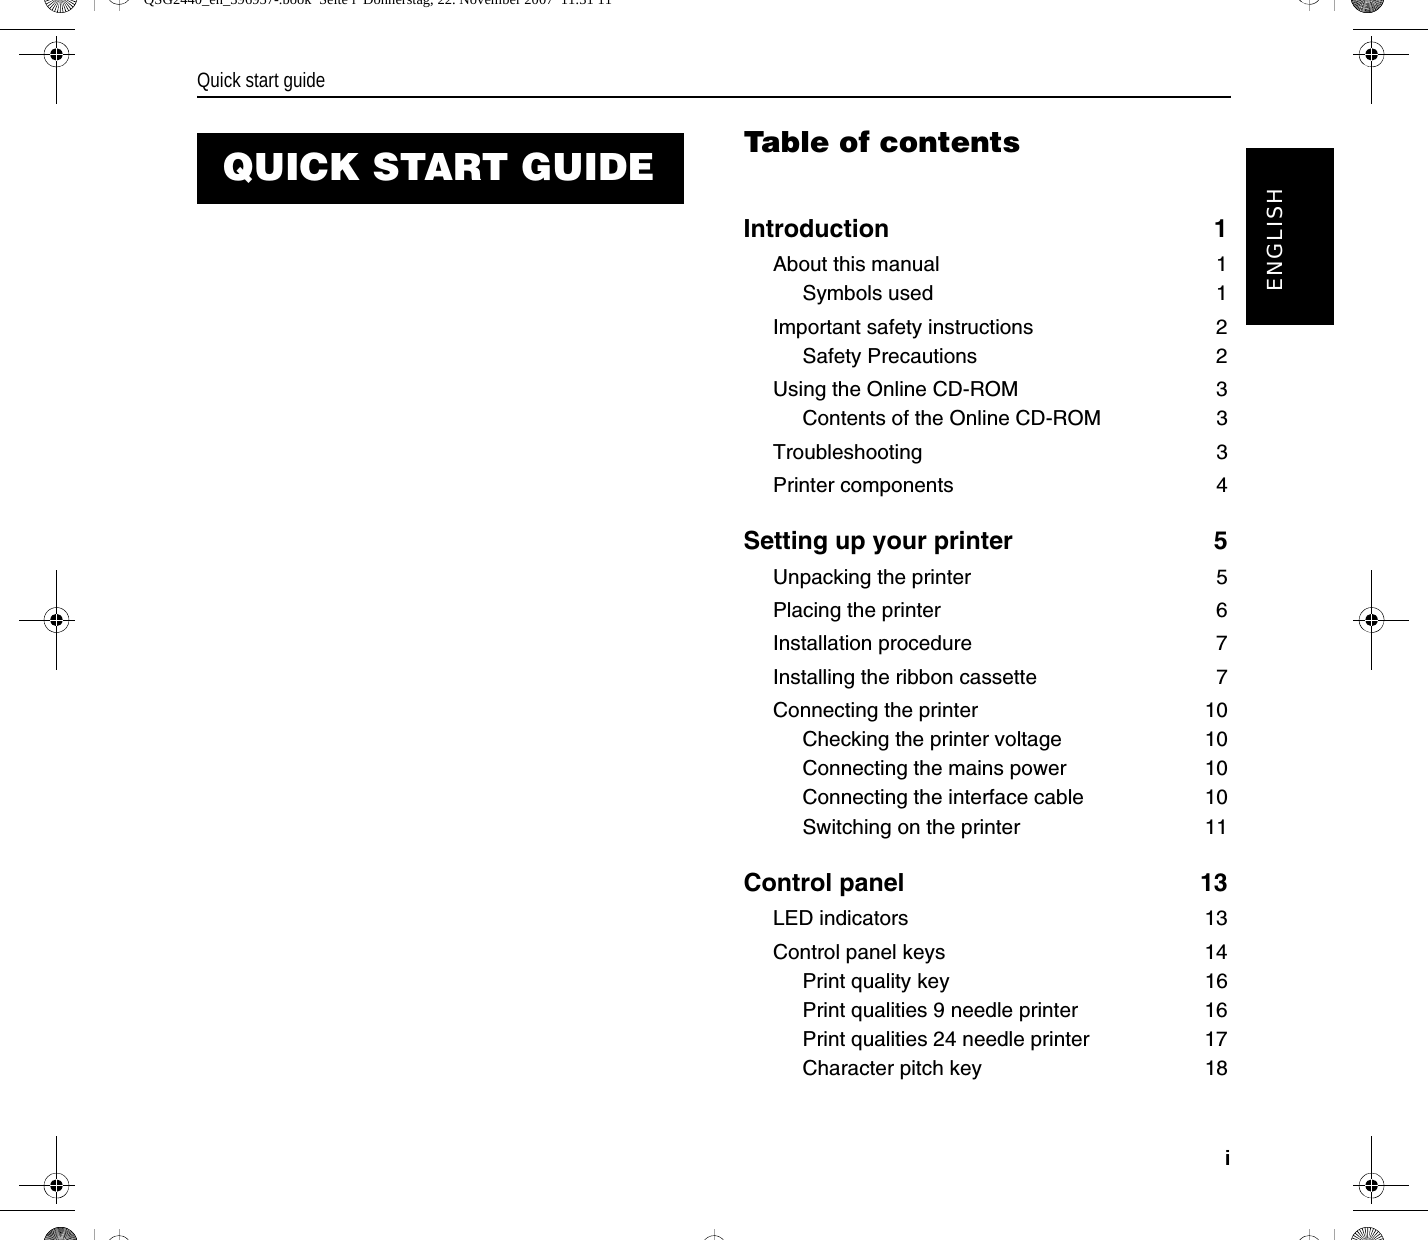 Quick start guideiENGLISHTable of contentsIntroduction 1About this manual 1Symbols used 1Important safety instructions 2Safety Precautions 2Using the Online CD-ROM 3Contents of the Online CD-ROM 3Troubleshooting 3Printer components 4Setting up your printer 5Unpacking the printer 5Placing the printer 6Installation procedure 7Installing the ribbon cassette 7Connecting the printer 10Checking the printer voltage 10Connecting the mains power 10Connecting the interface cable 10Switching on the printer 11Control panel 13LED indicators 13Control panel keys 14Print quality key 16Print qualities 9 needle printer 16Print qualities 24 needle printer 17Character pitch key 18QUICK START GUIDEQSG2440_en_396957-.book  Seite i  Donnerstag, 22. November 2007  11:31 11